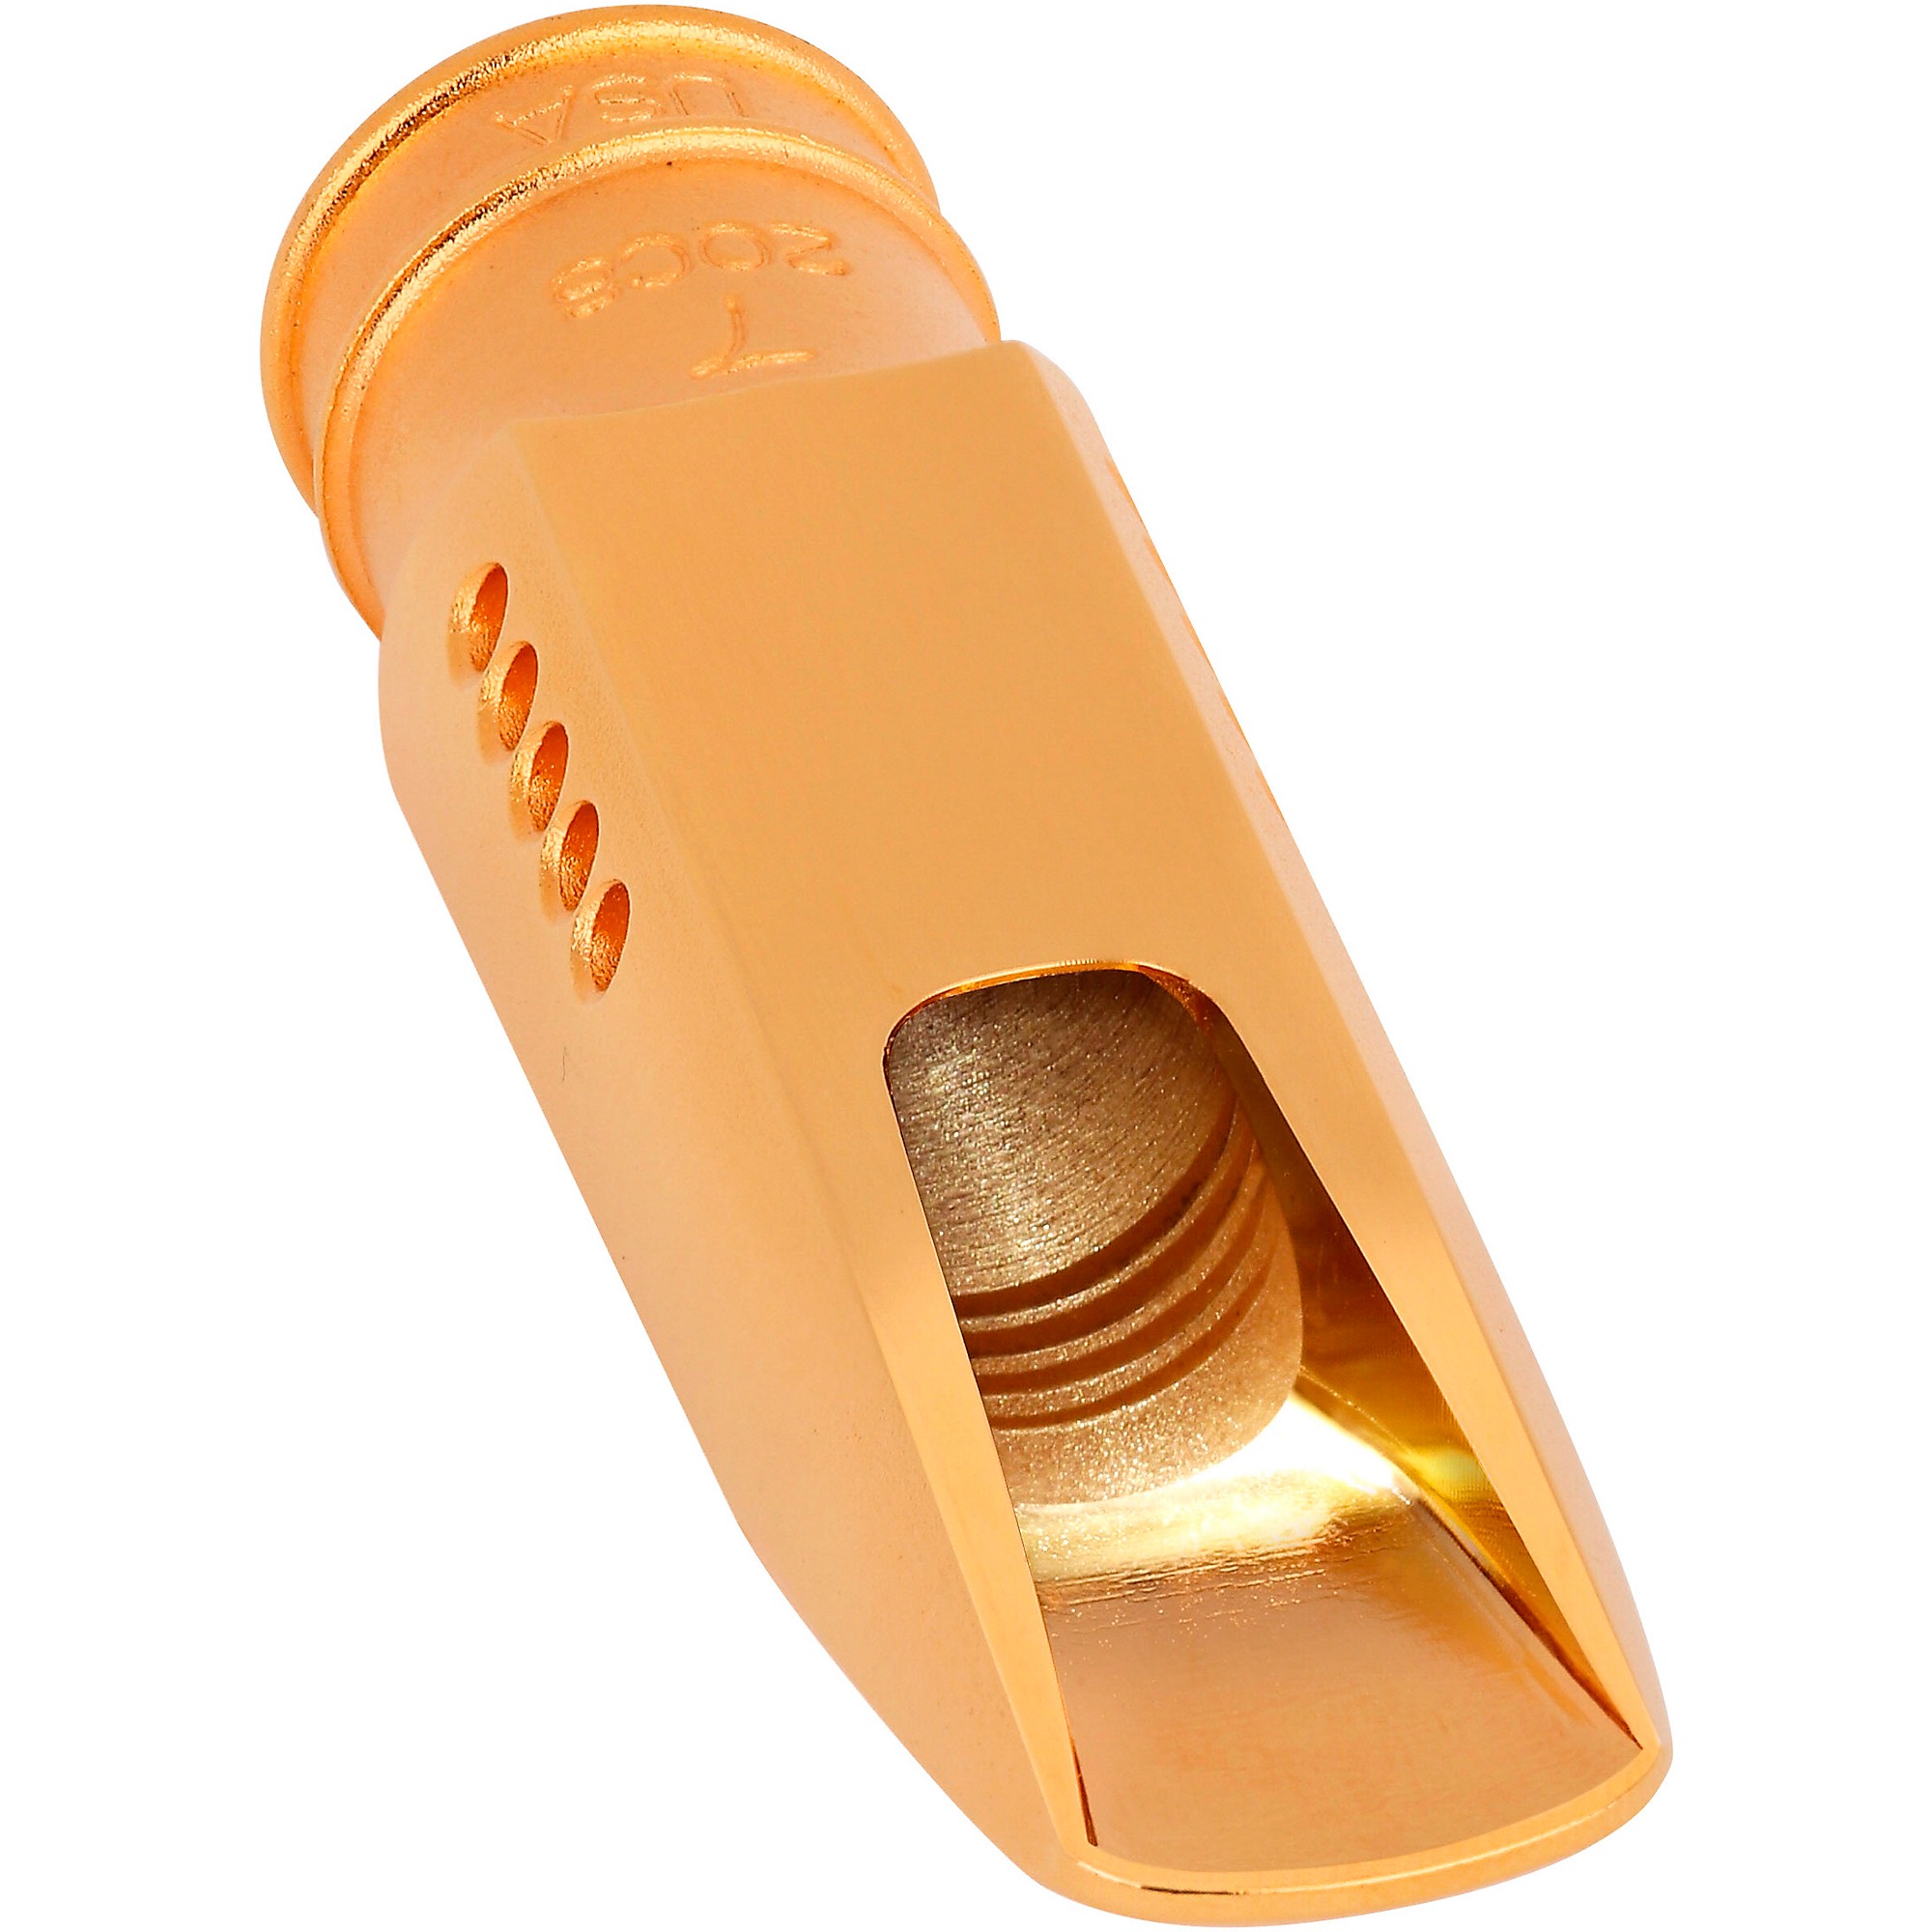  Theo Wanne Instruments ELEMENTS EARTH 2 Alto Saxophone  Mouthpiece Gold Size 7 : Musical Instruments